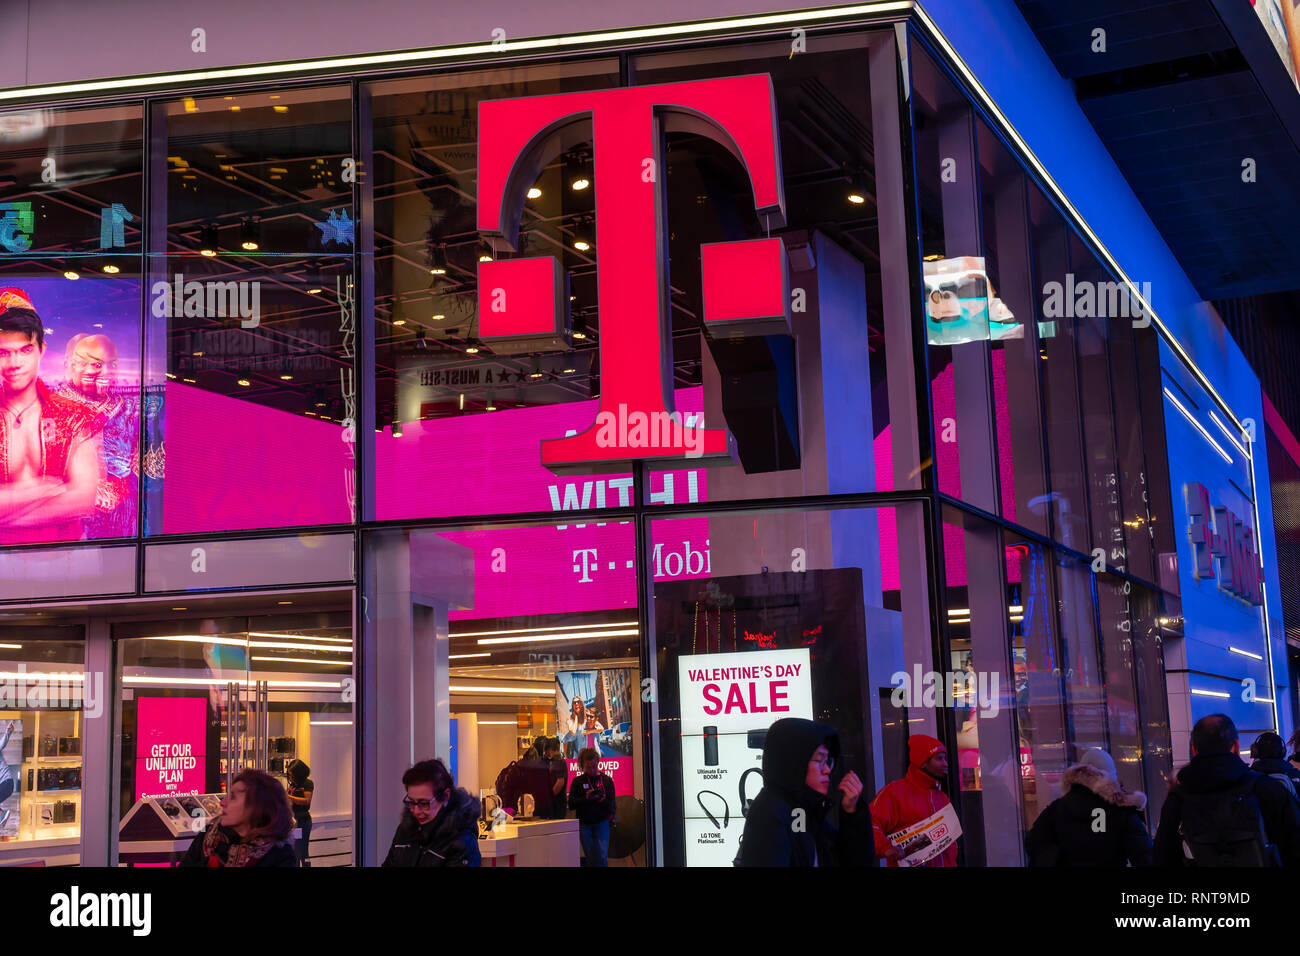 A  T-Mobile mobile phone store in Times Square in New York, seen on Tuesday, February 13, 2019. (© Richard B. Levine) Stock Photo